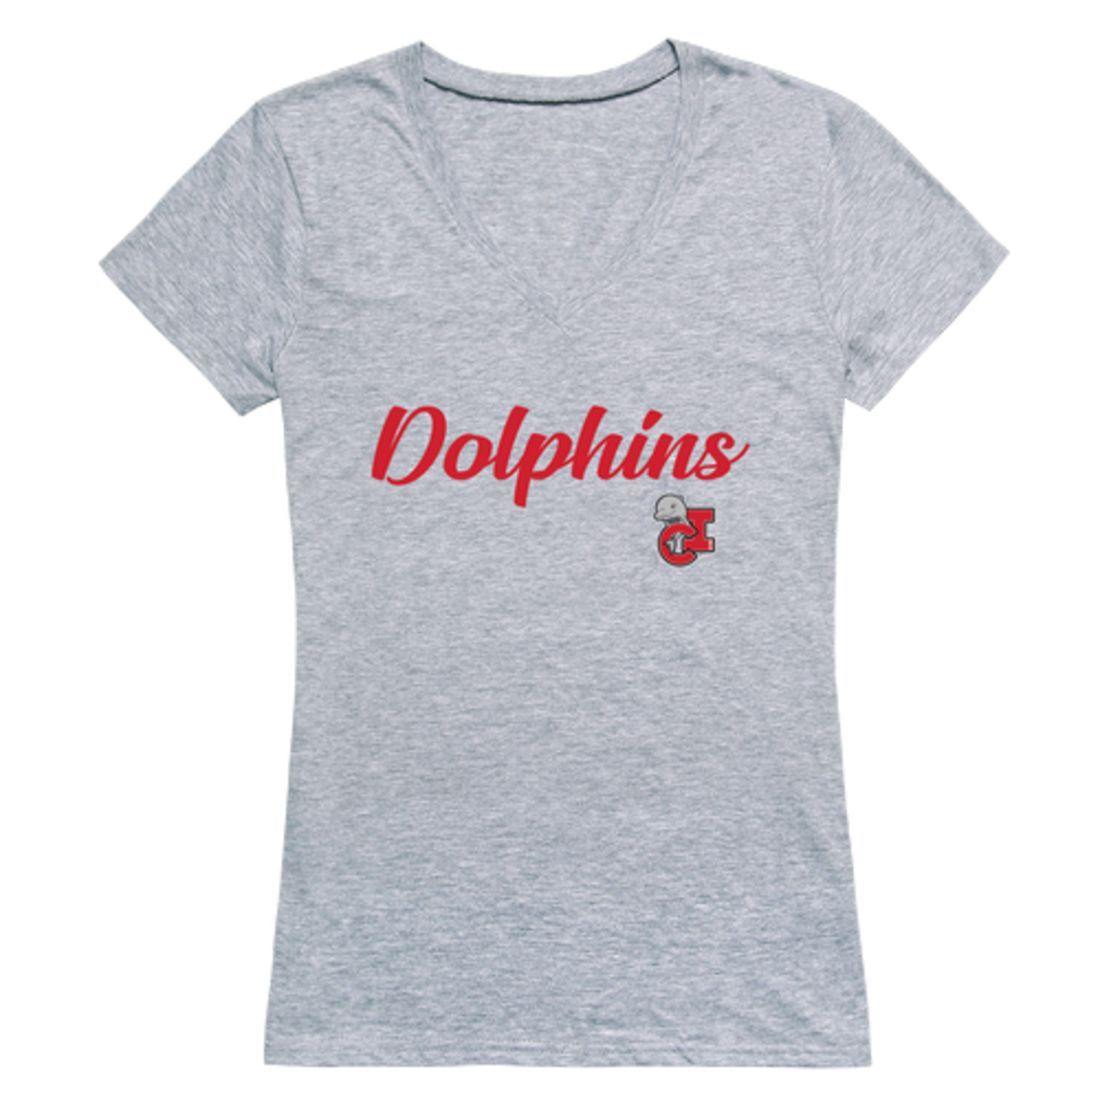 CSUCI California State University Channel Islands The Dolphins Womens Script Tee T-Shirt-Campus-Wardrobe